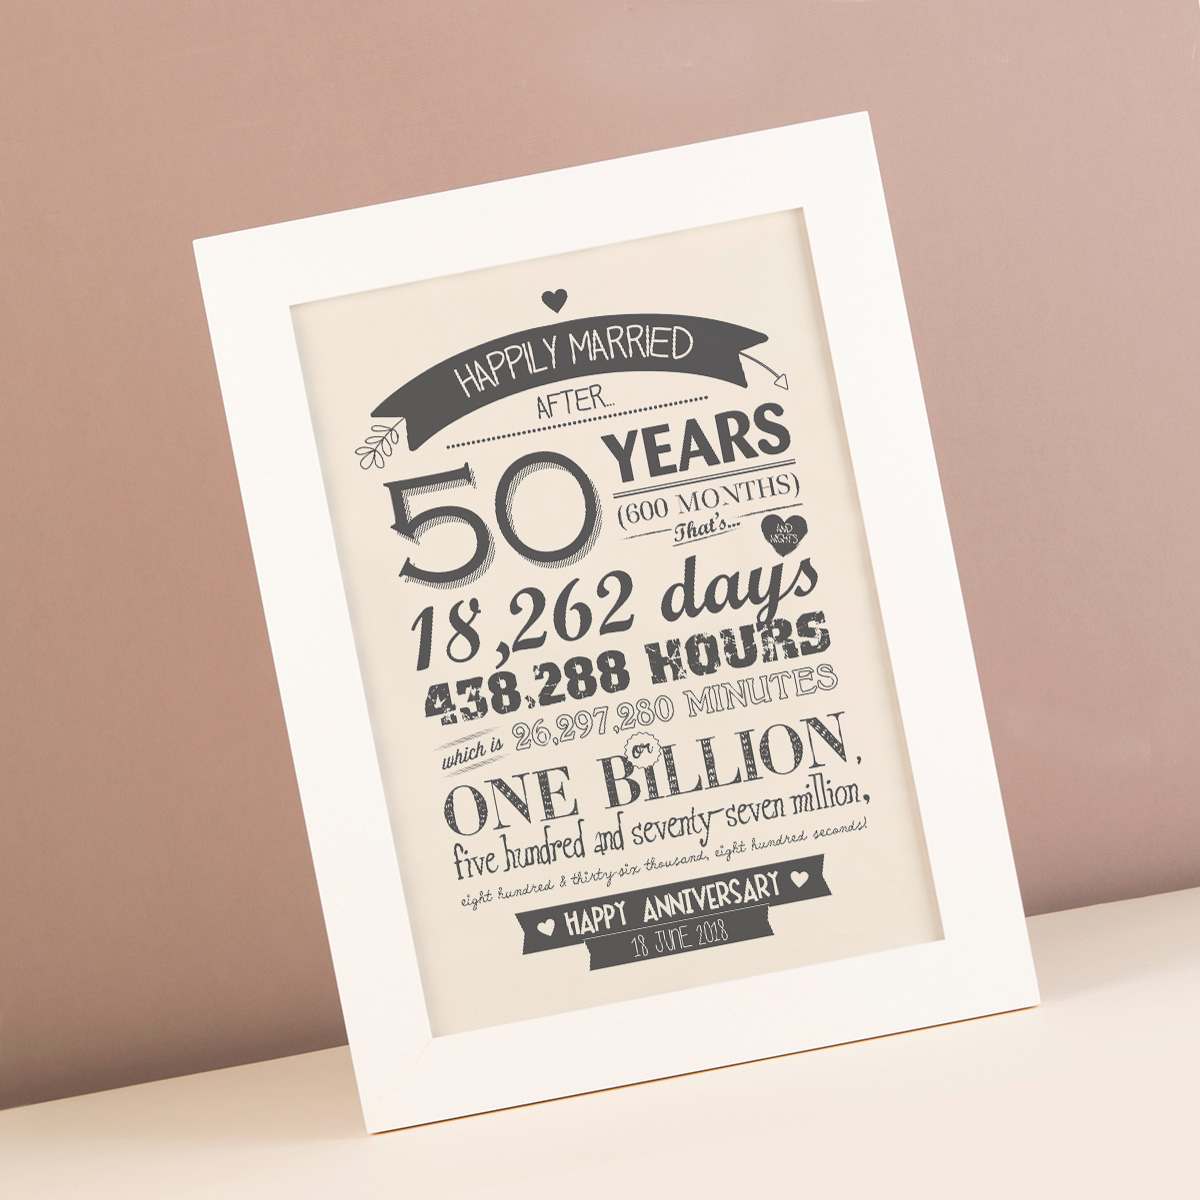 Personalised Framed Print - After 50 Years